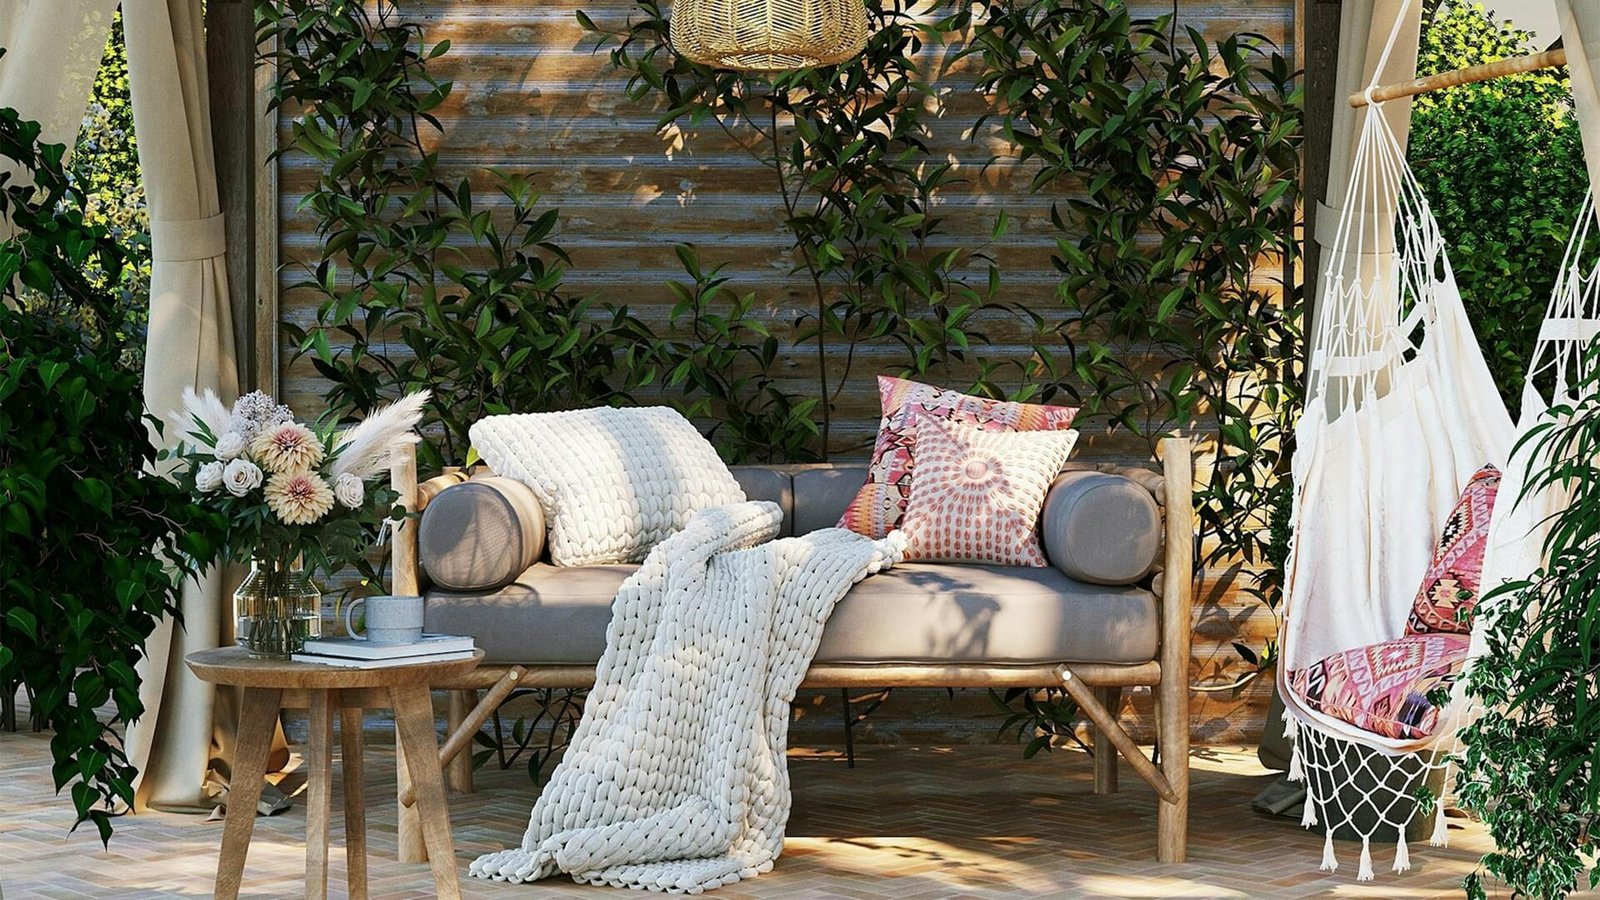 outdoor bench with cushions and blanket surrounded by overgrown plants